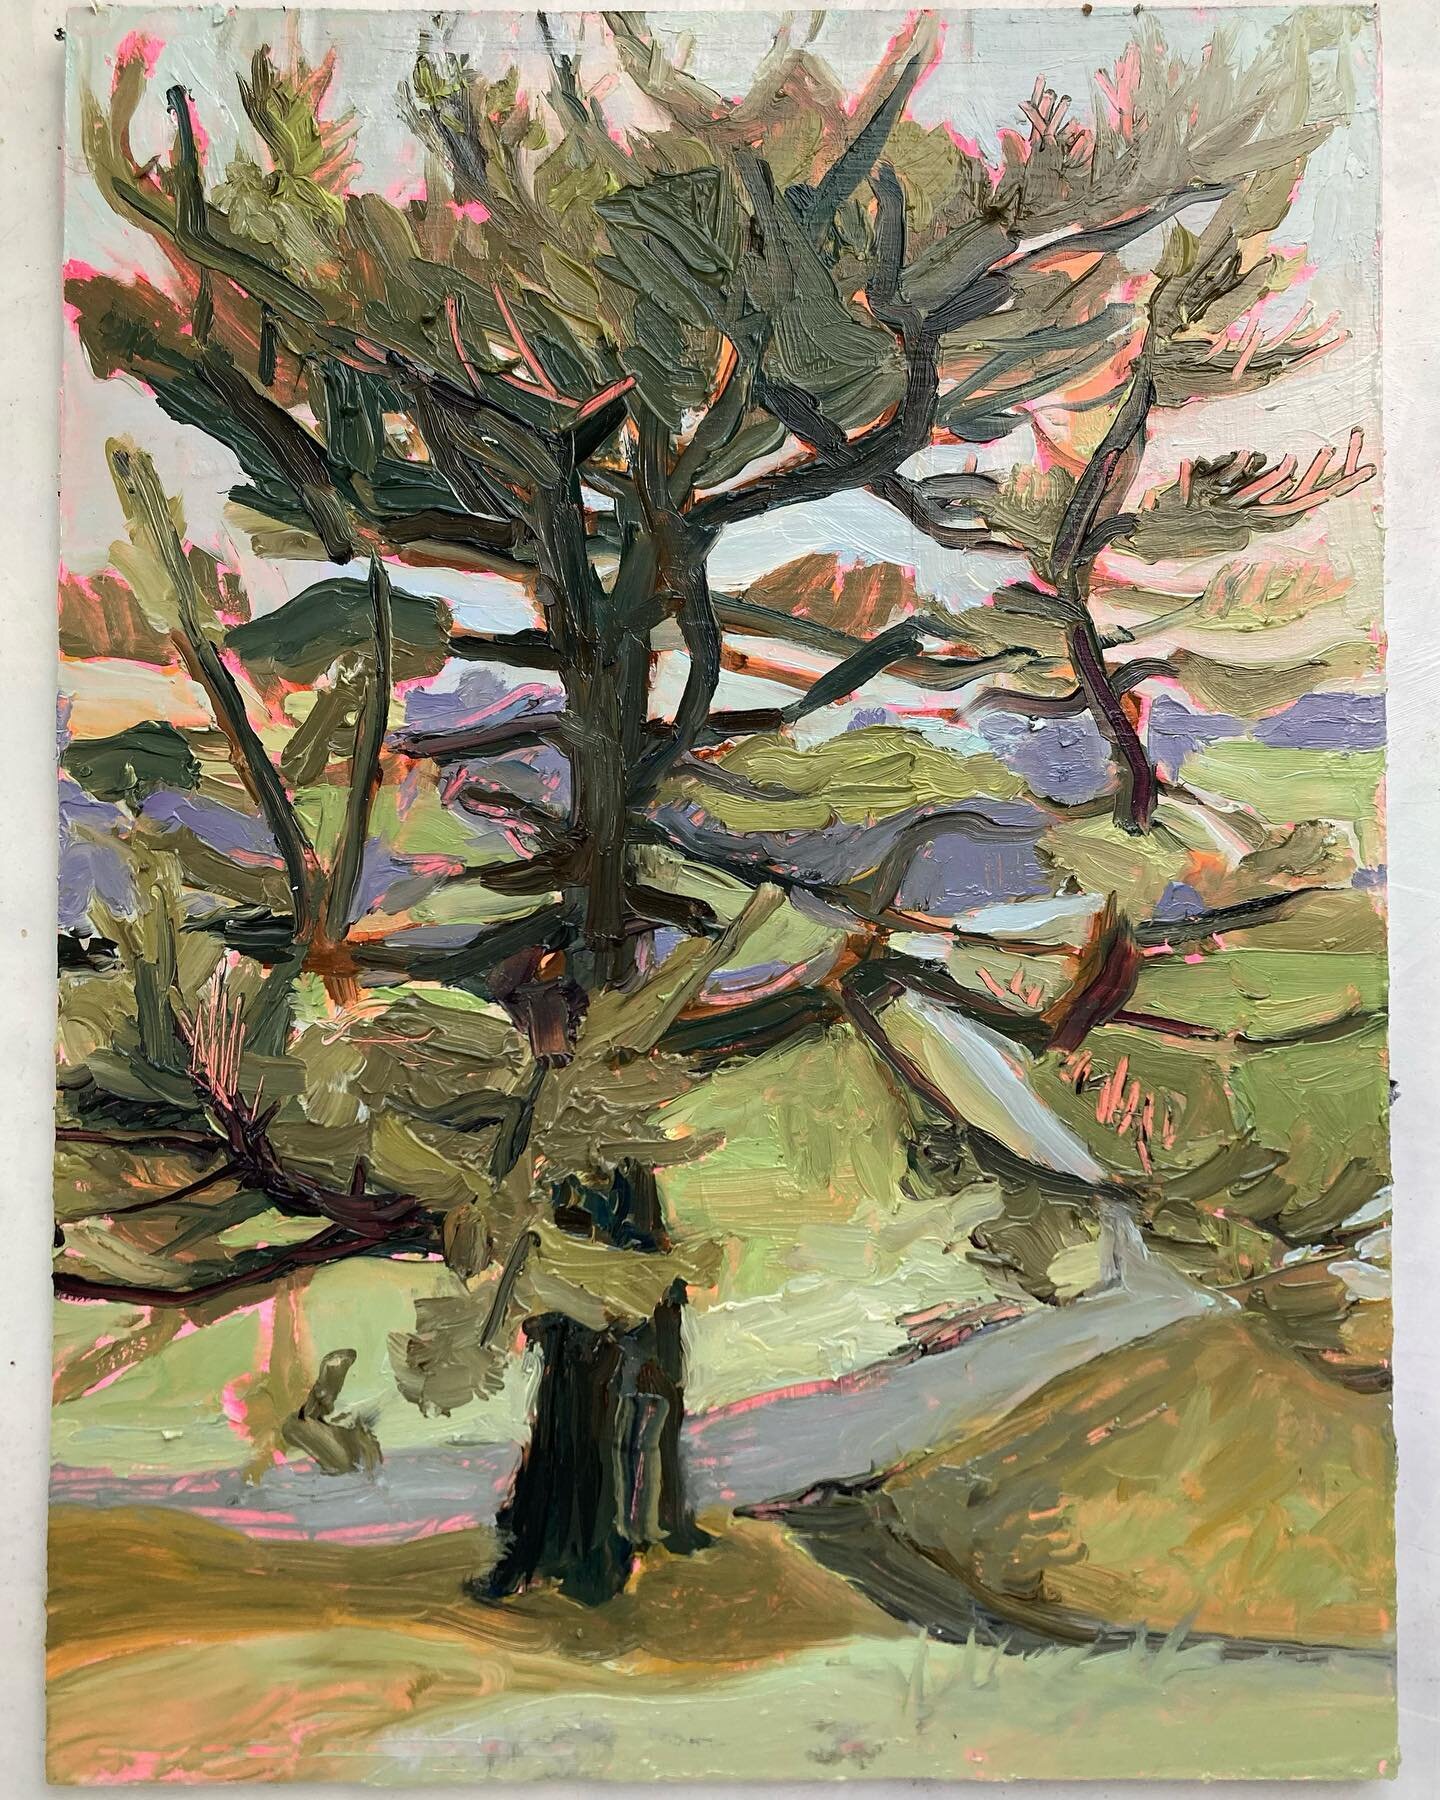 Tree by path, 12x9&rdquo; (30.5x23 cm), oil on board. Paint till my fingers get too cold 🧤

_
#sold